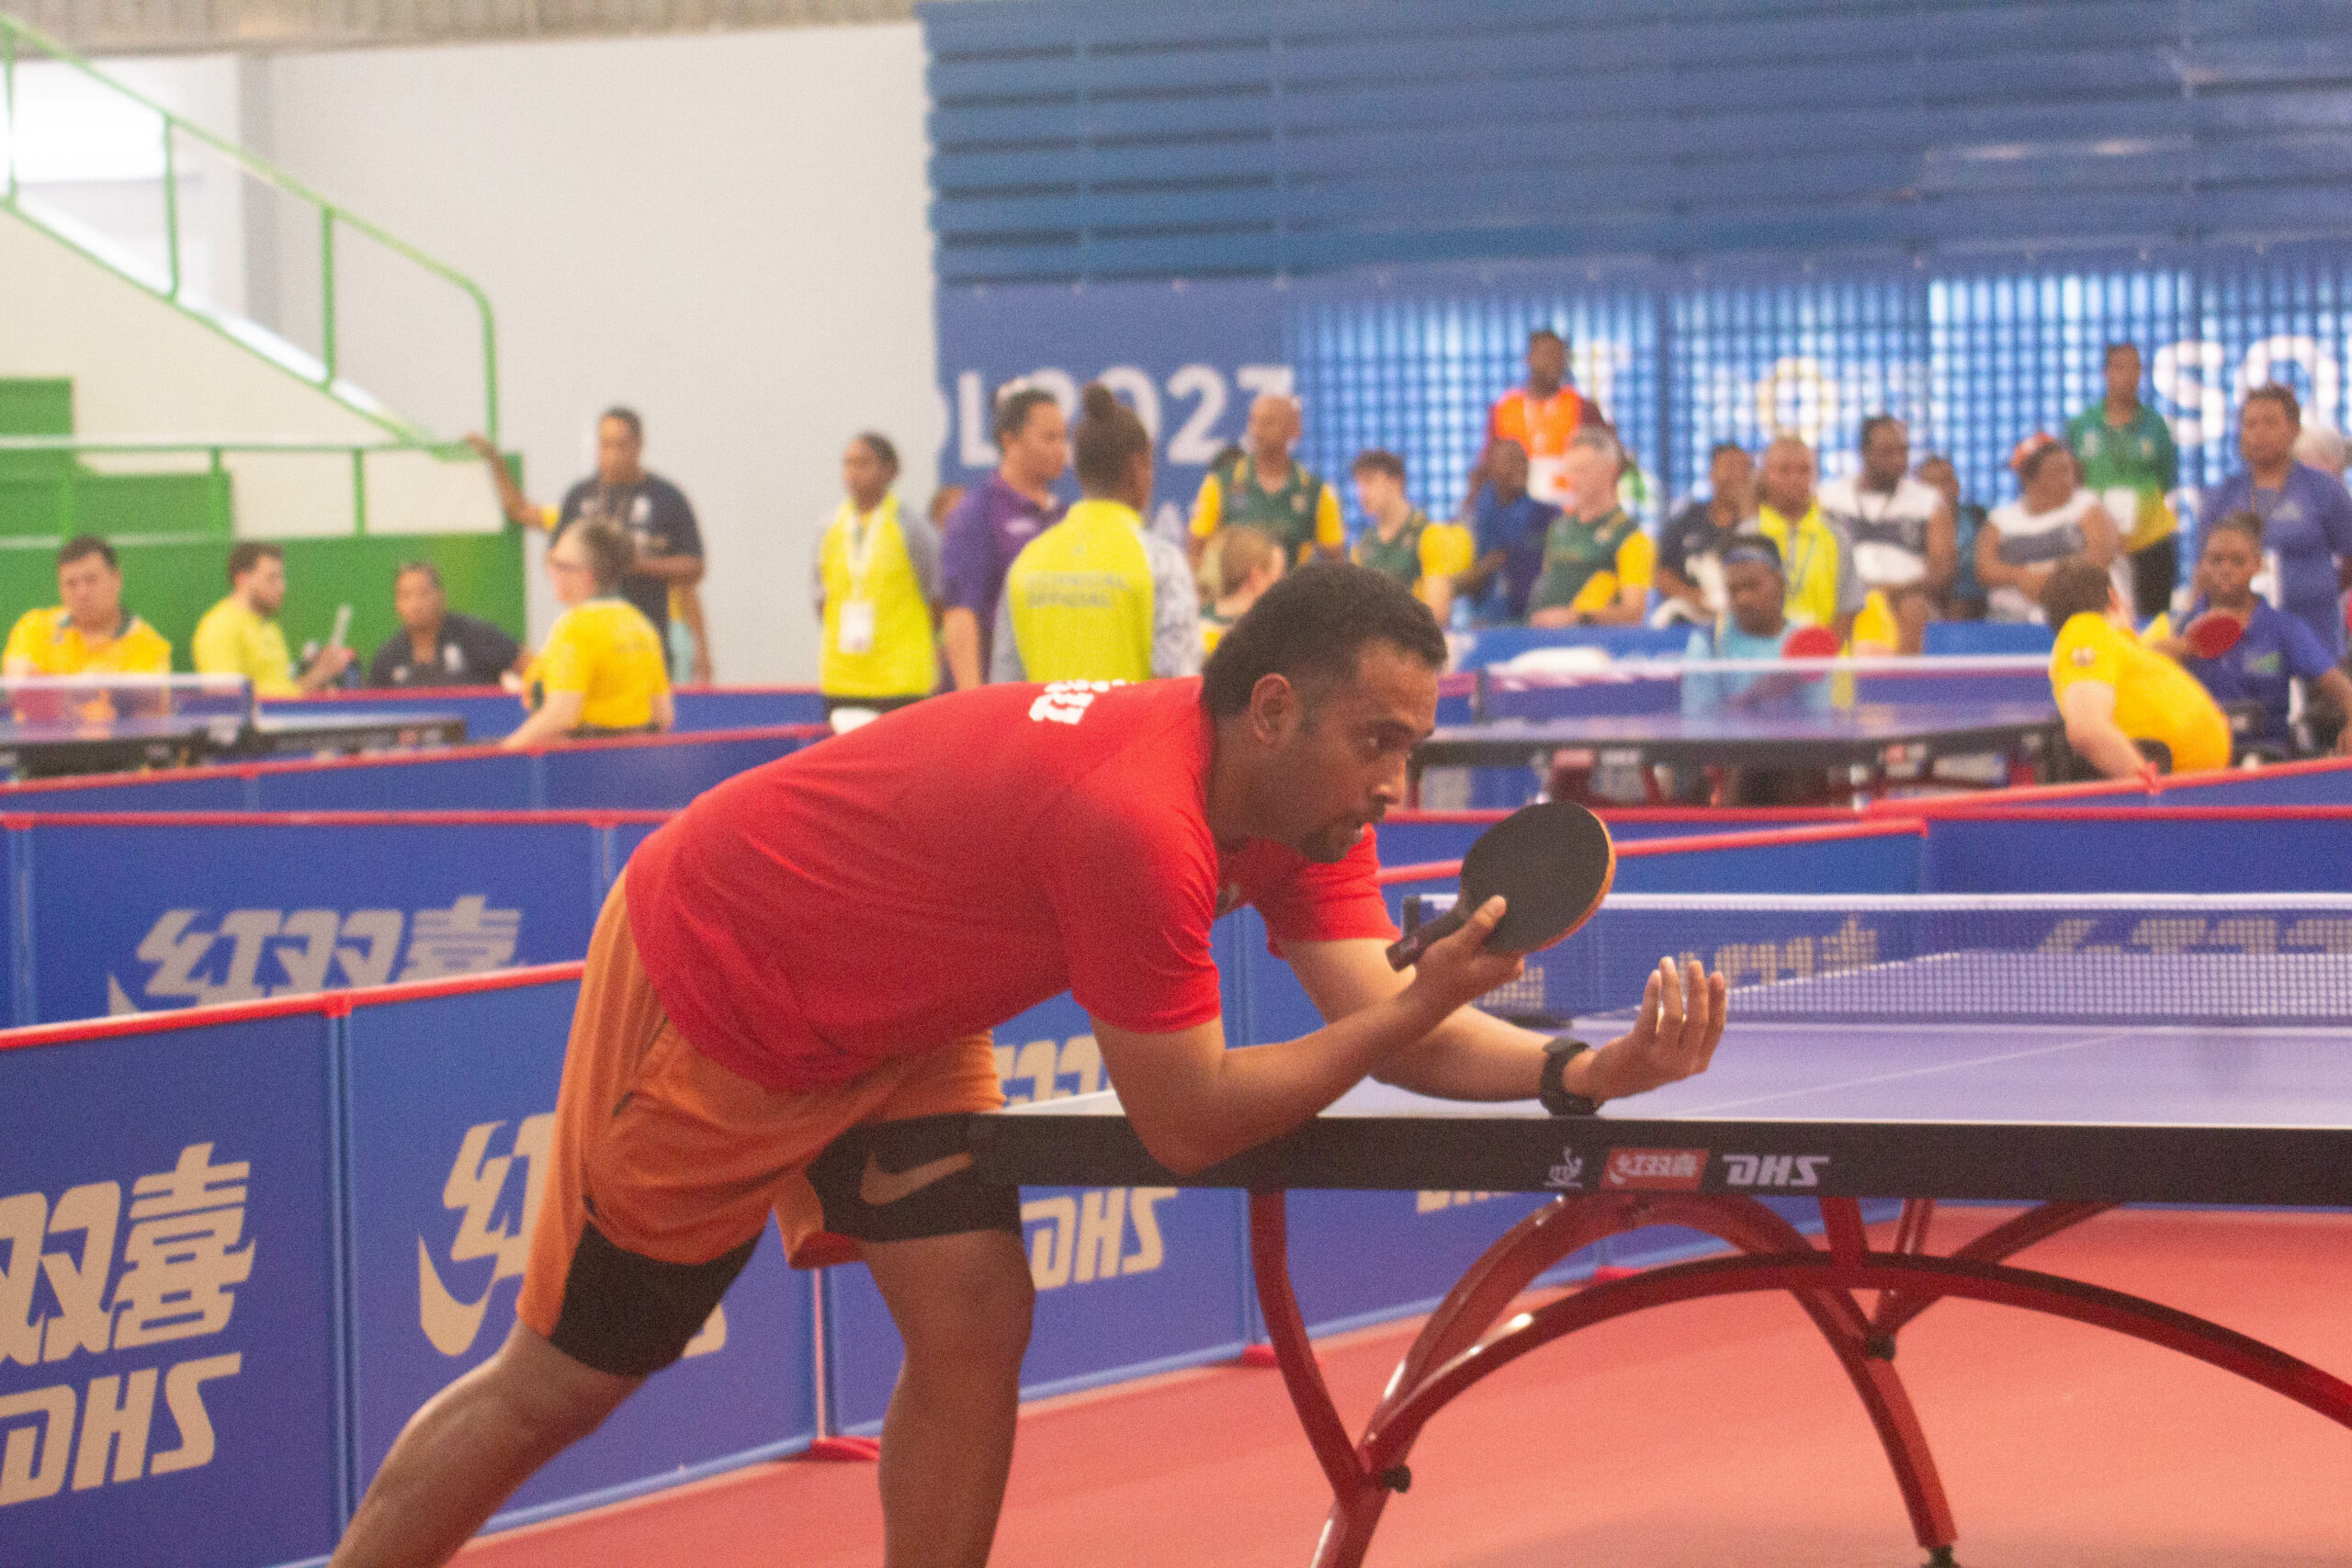 A man playing table tennis